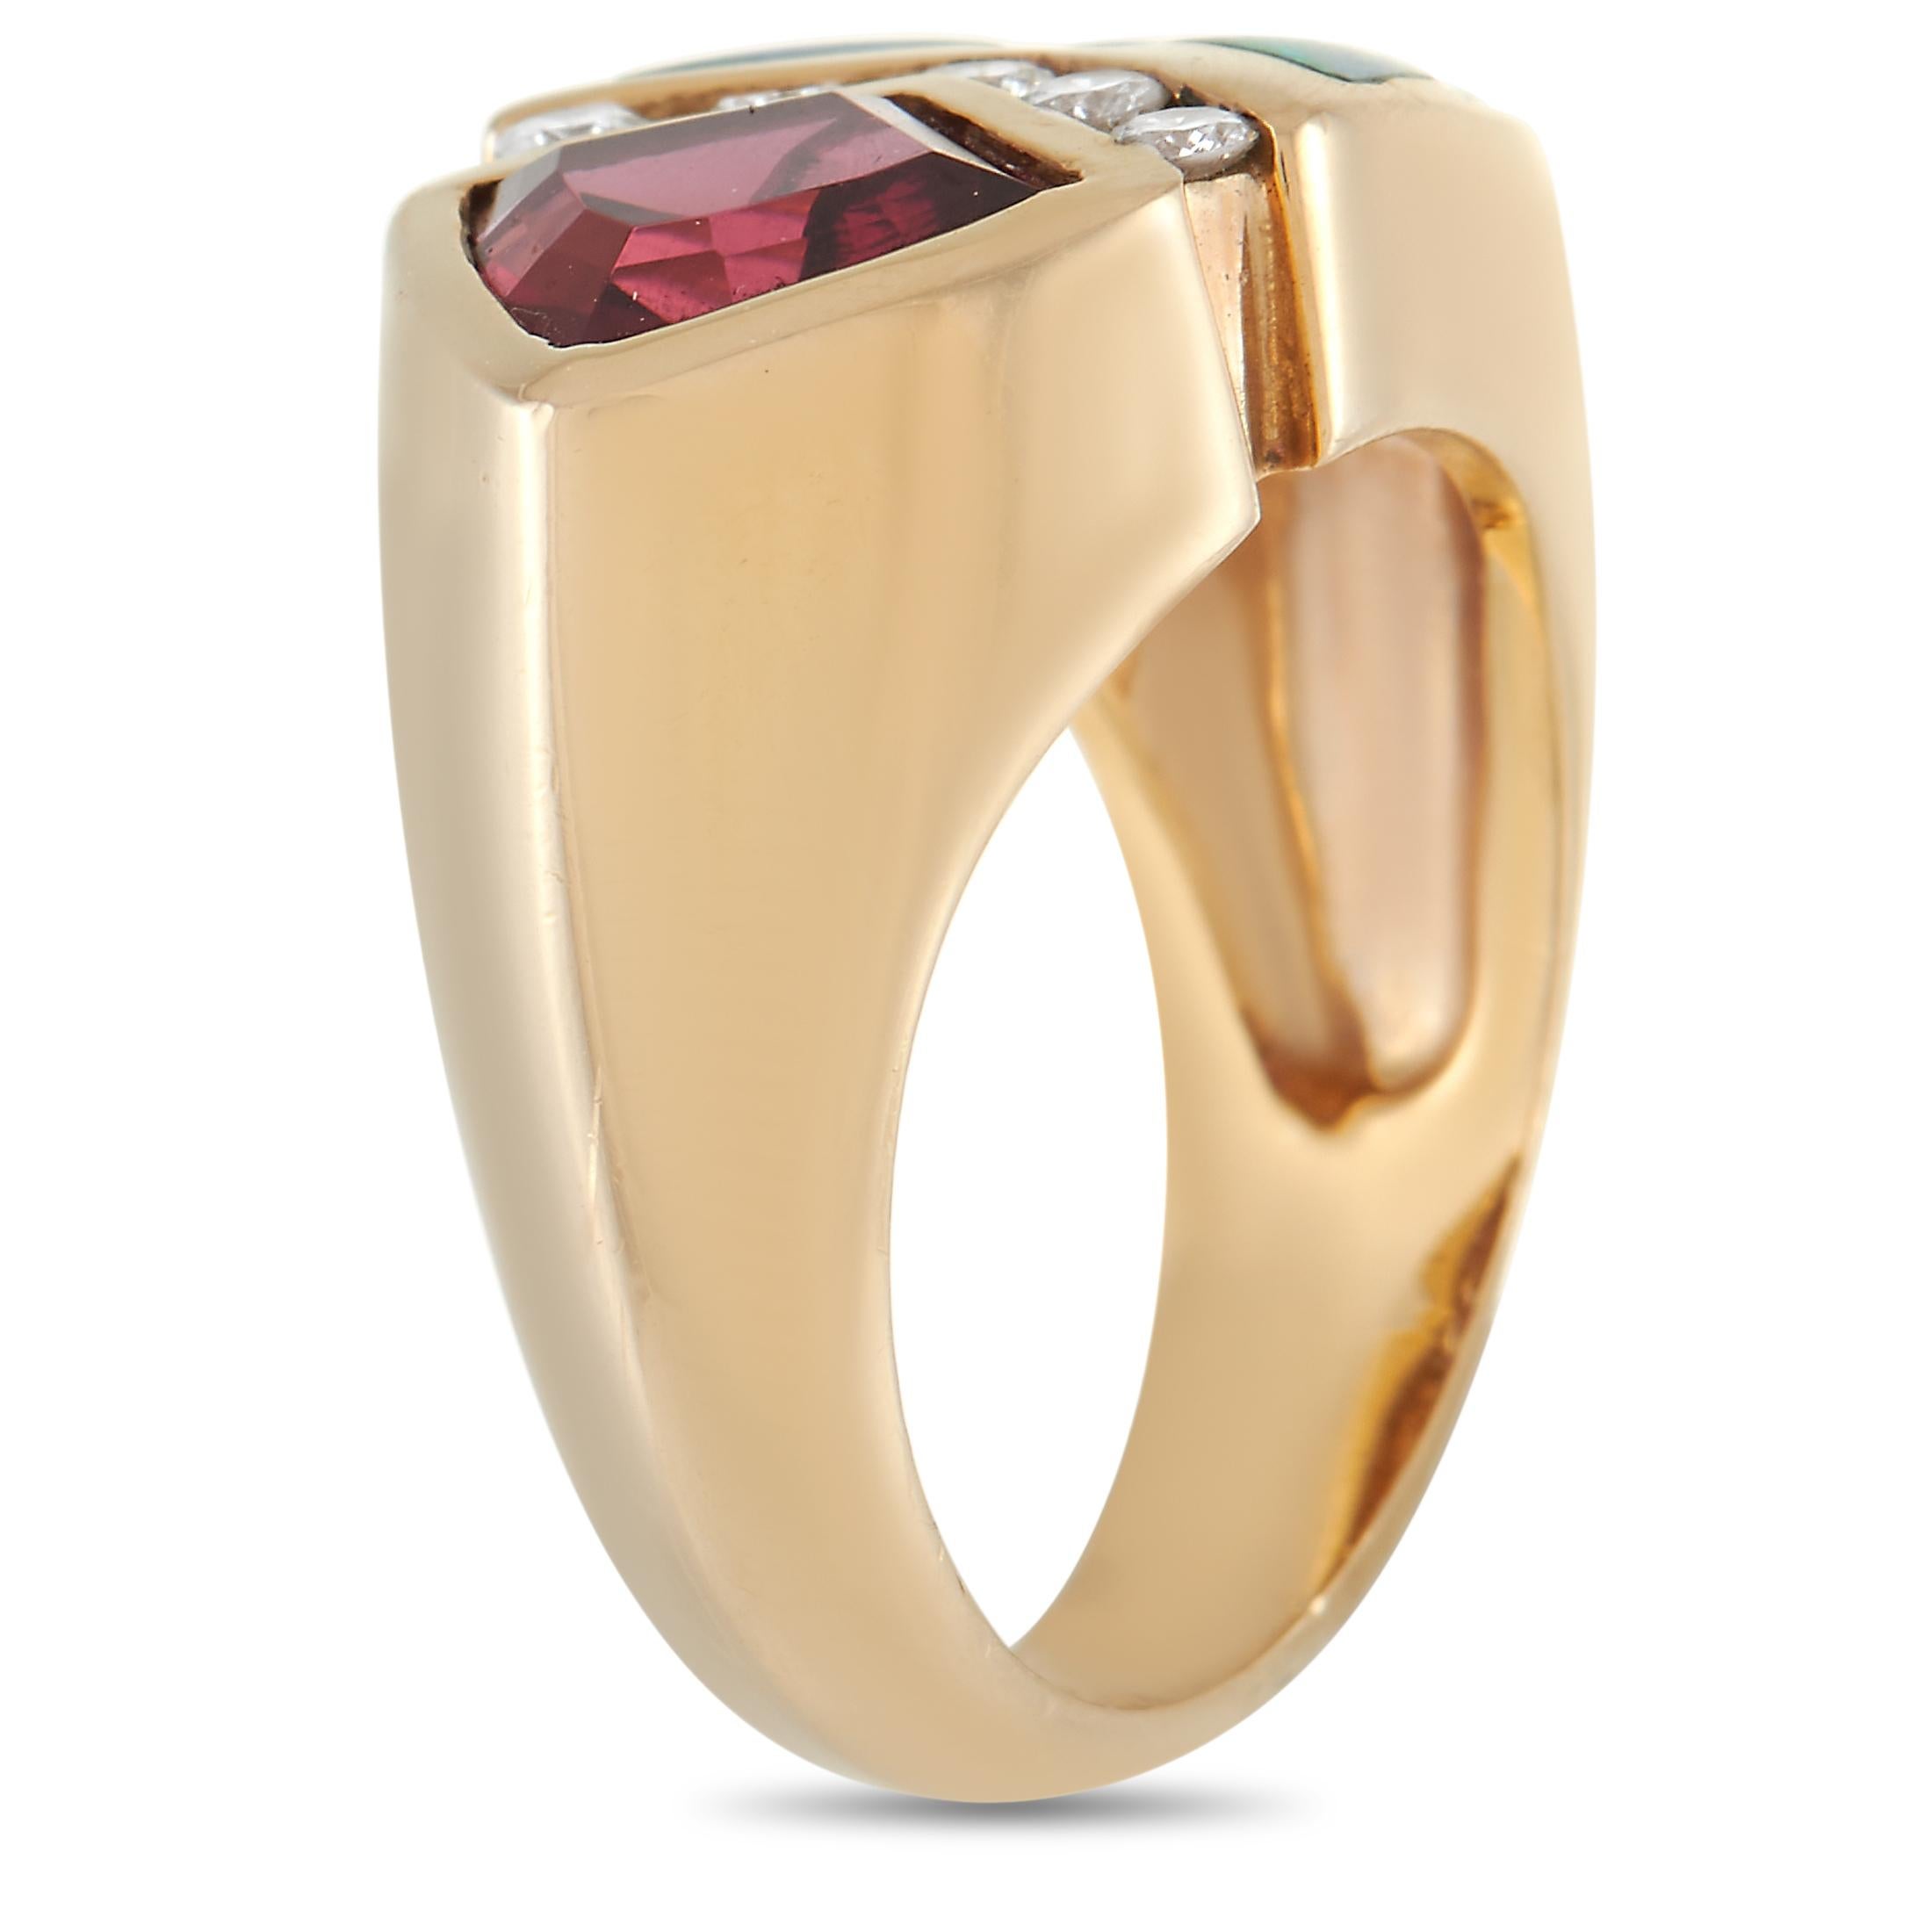  A unique combination of gemstones makes this 14K Yellow Gold ring from Kabana truly dynamic in design. The arrangement is anchored by a breathtaking 1.70 carat Garnet gemstone, which is also accented by Inlaid Opal and 0.17 total carats of